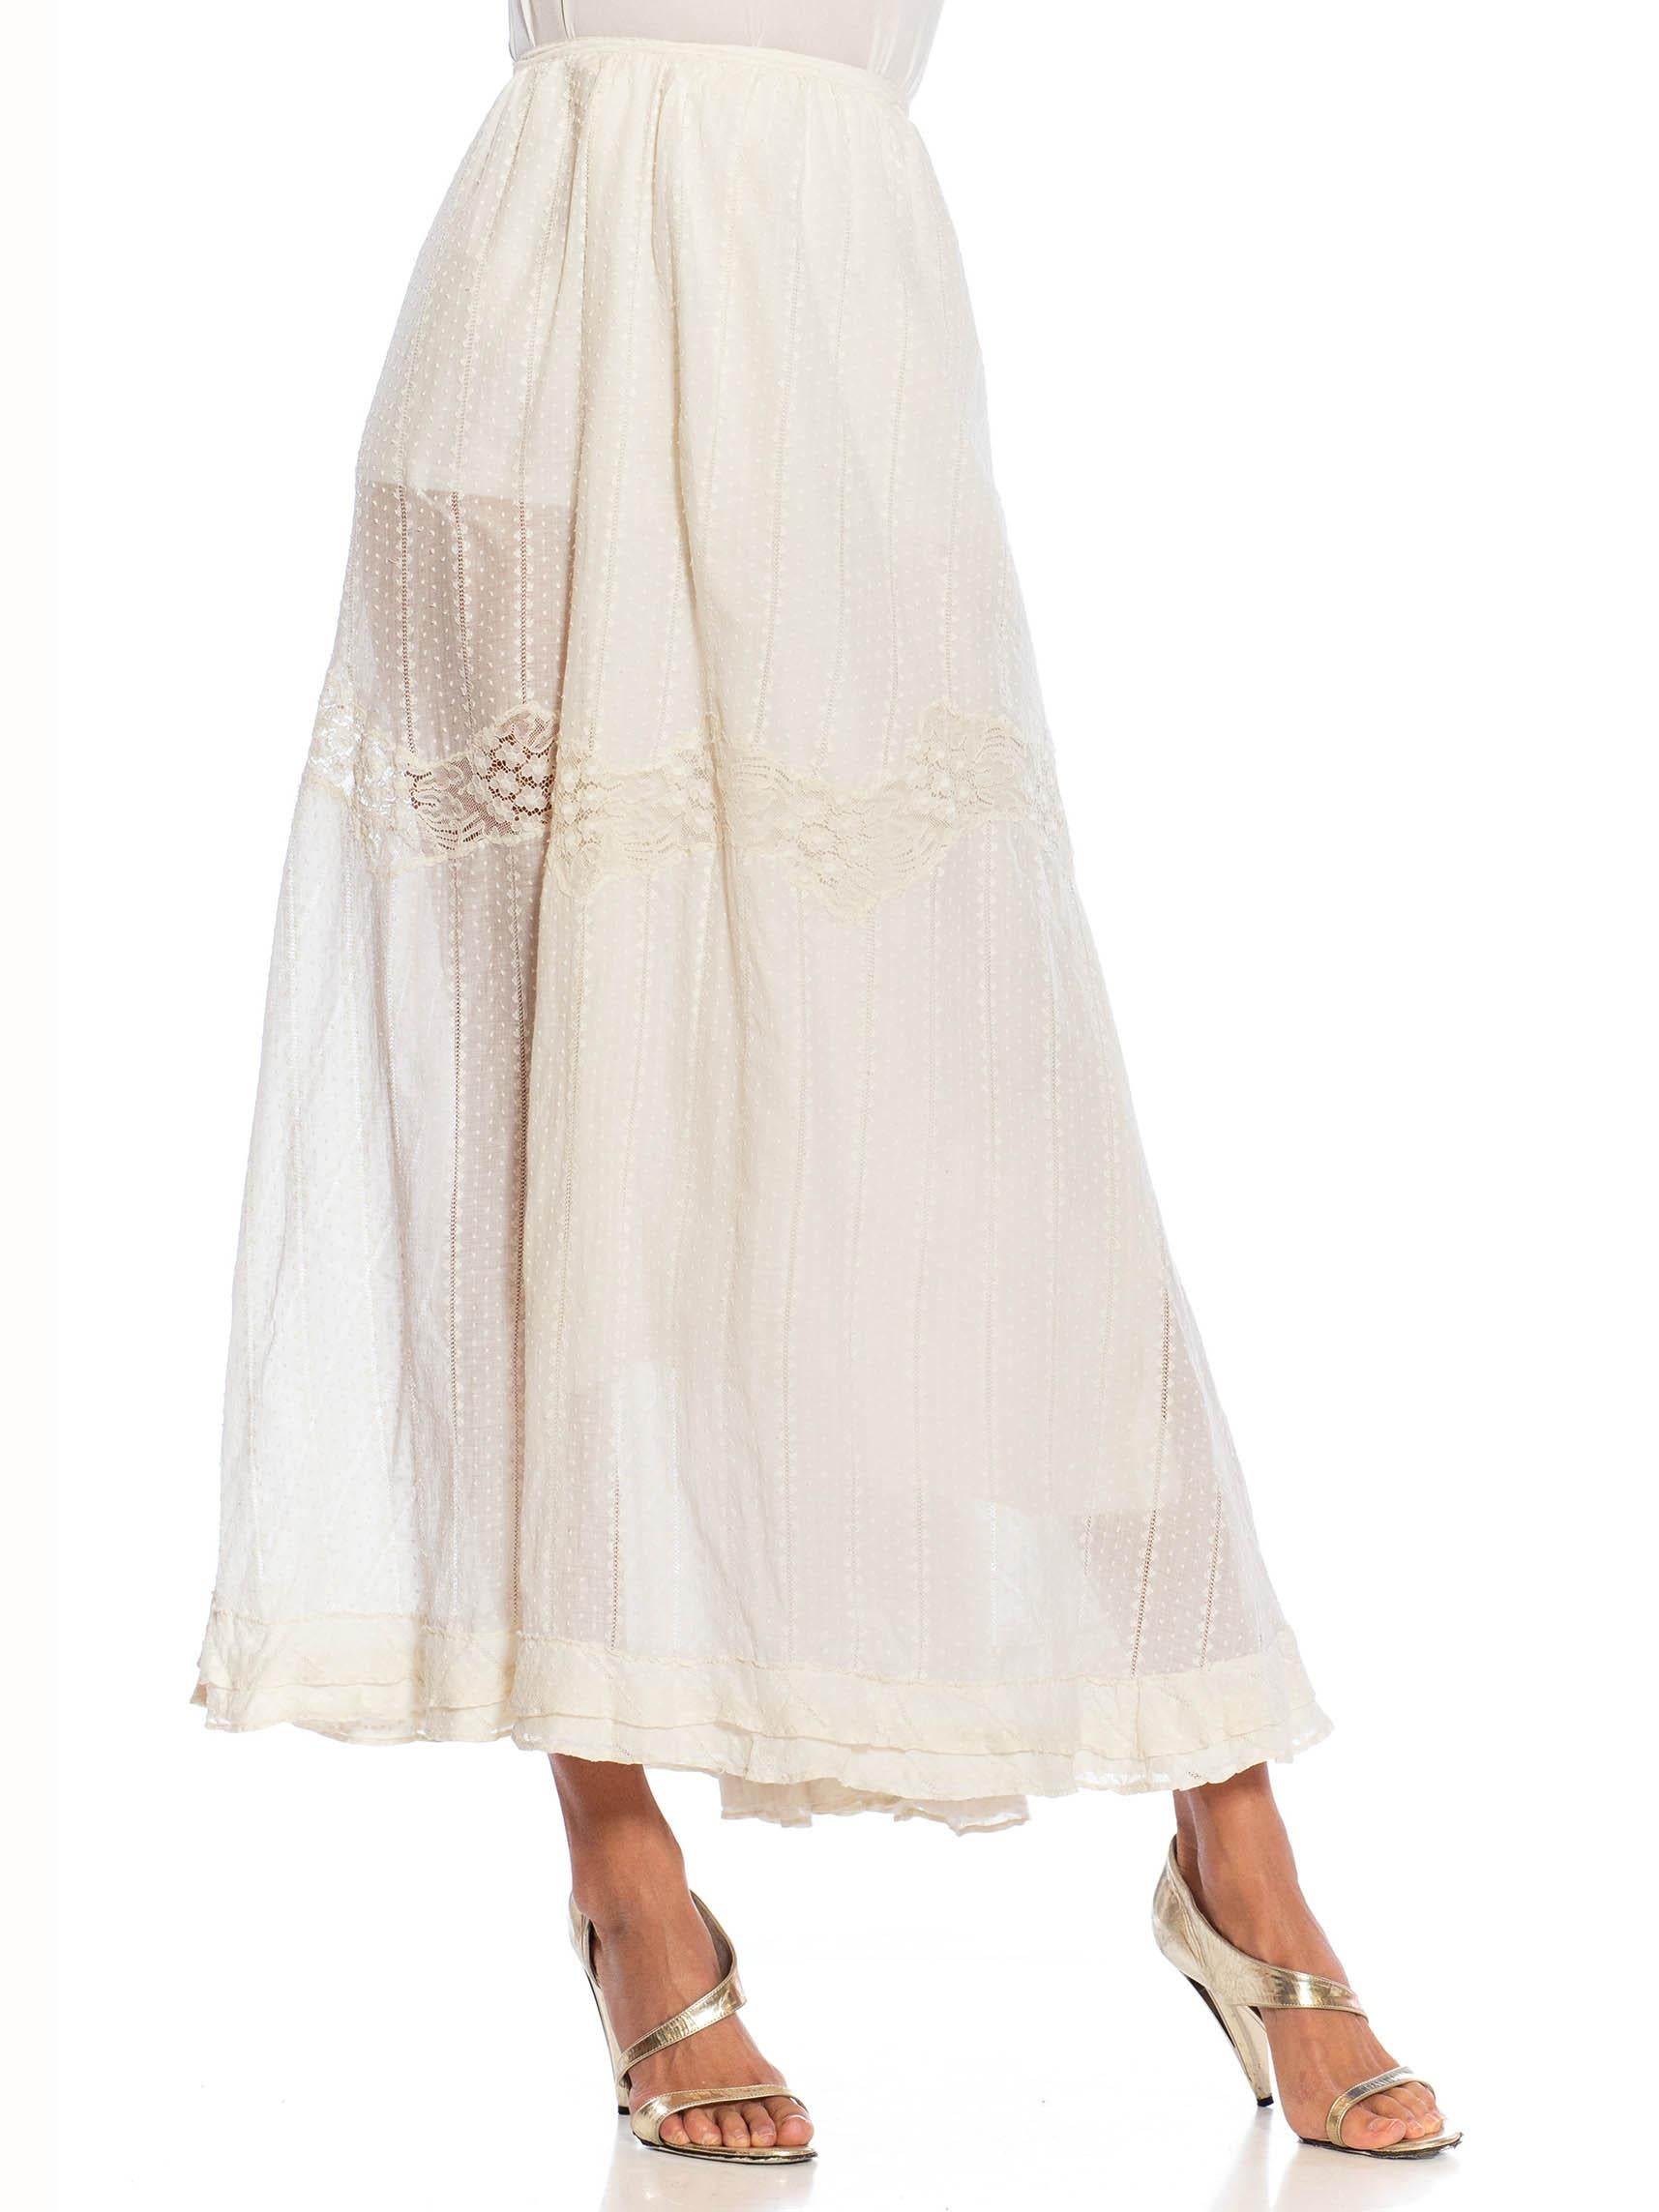 Women's Victorian Ivory Organic Cotton & Lace Trimmed Skirt For Sale